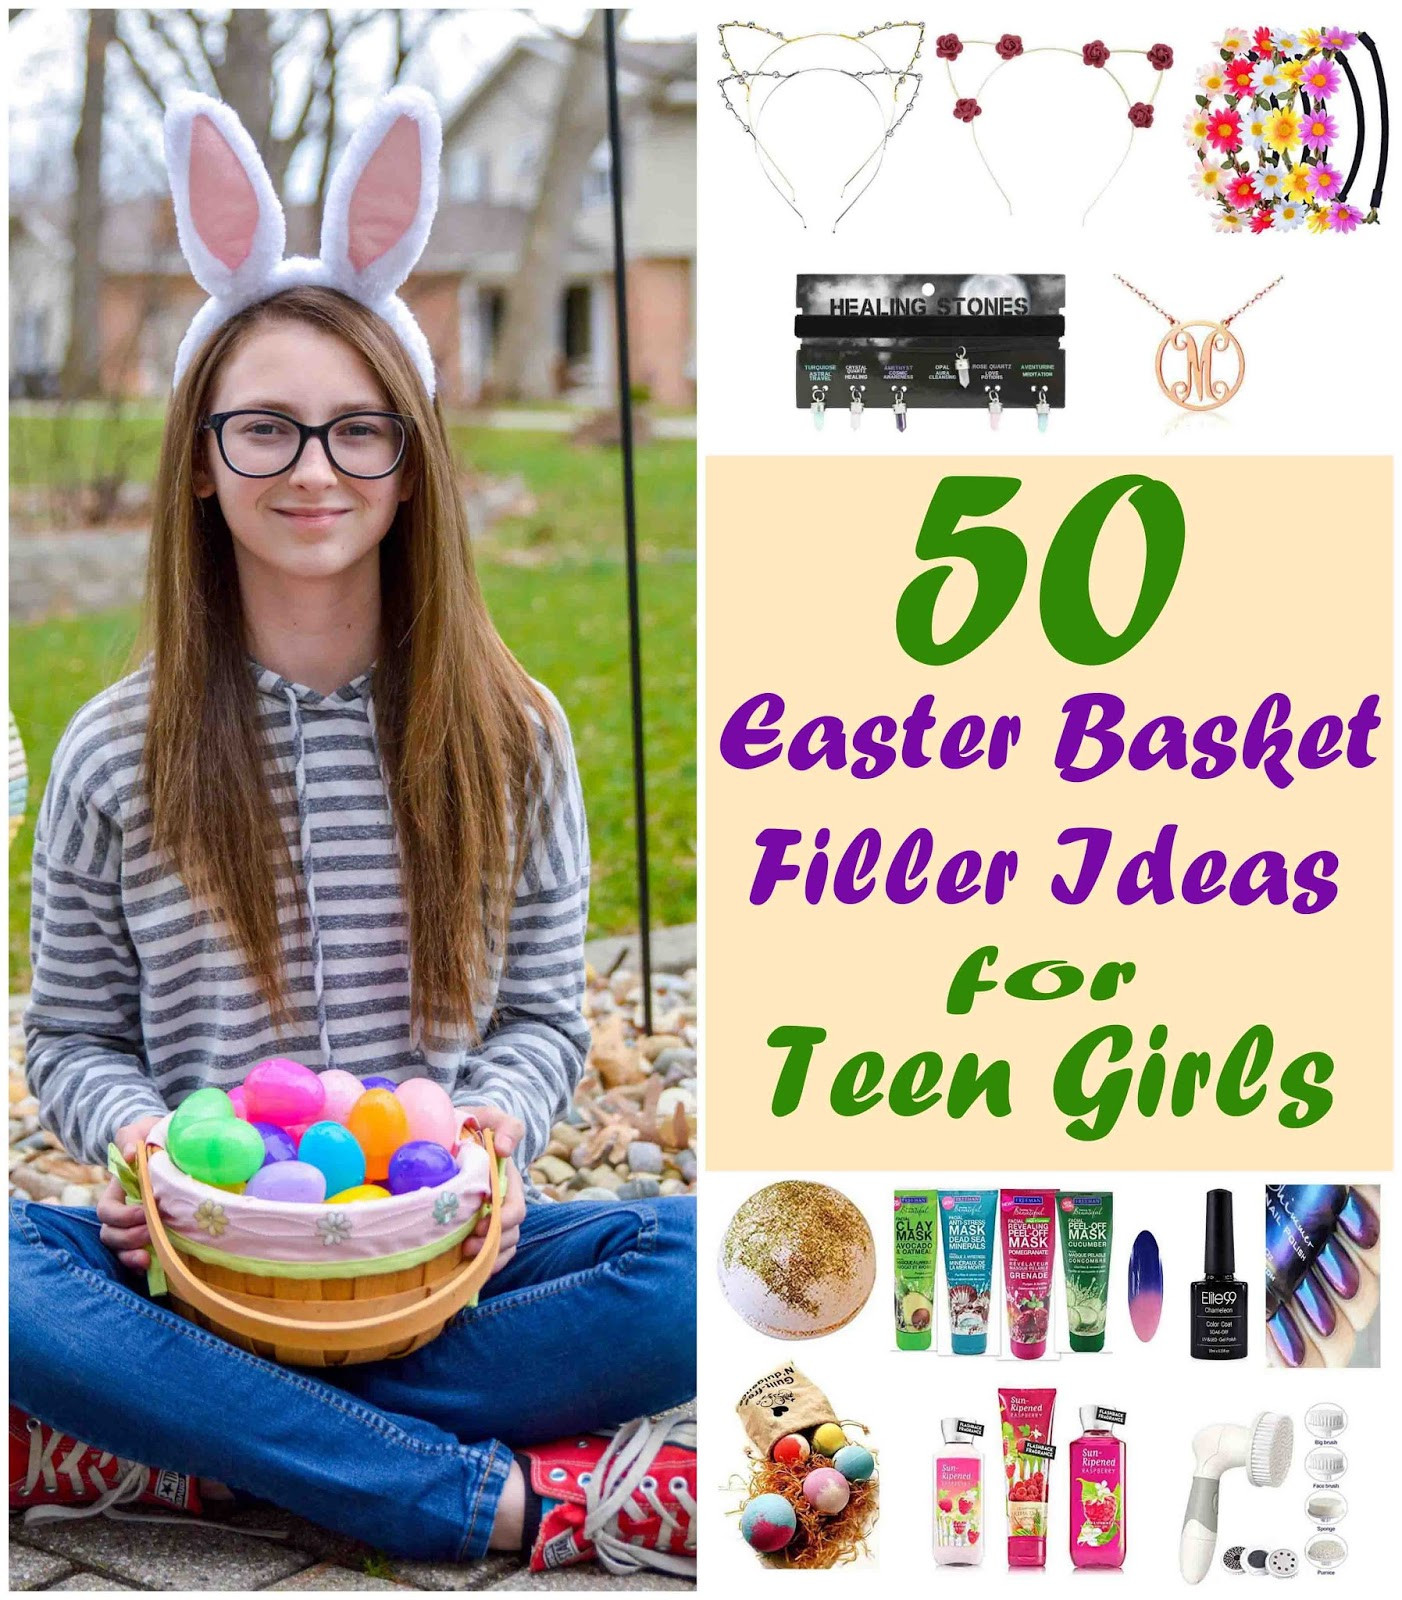 Teenage Girl Easter Basket Ideas
 Theresa s Mixed Nuts Allison s Top 50 Easter Basket